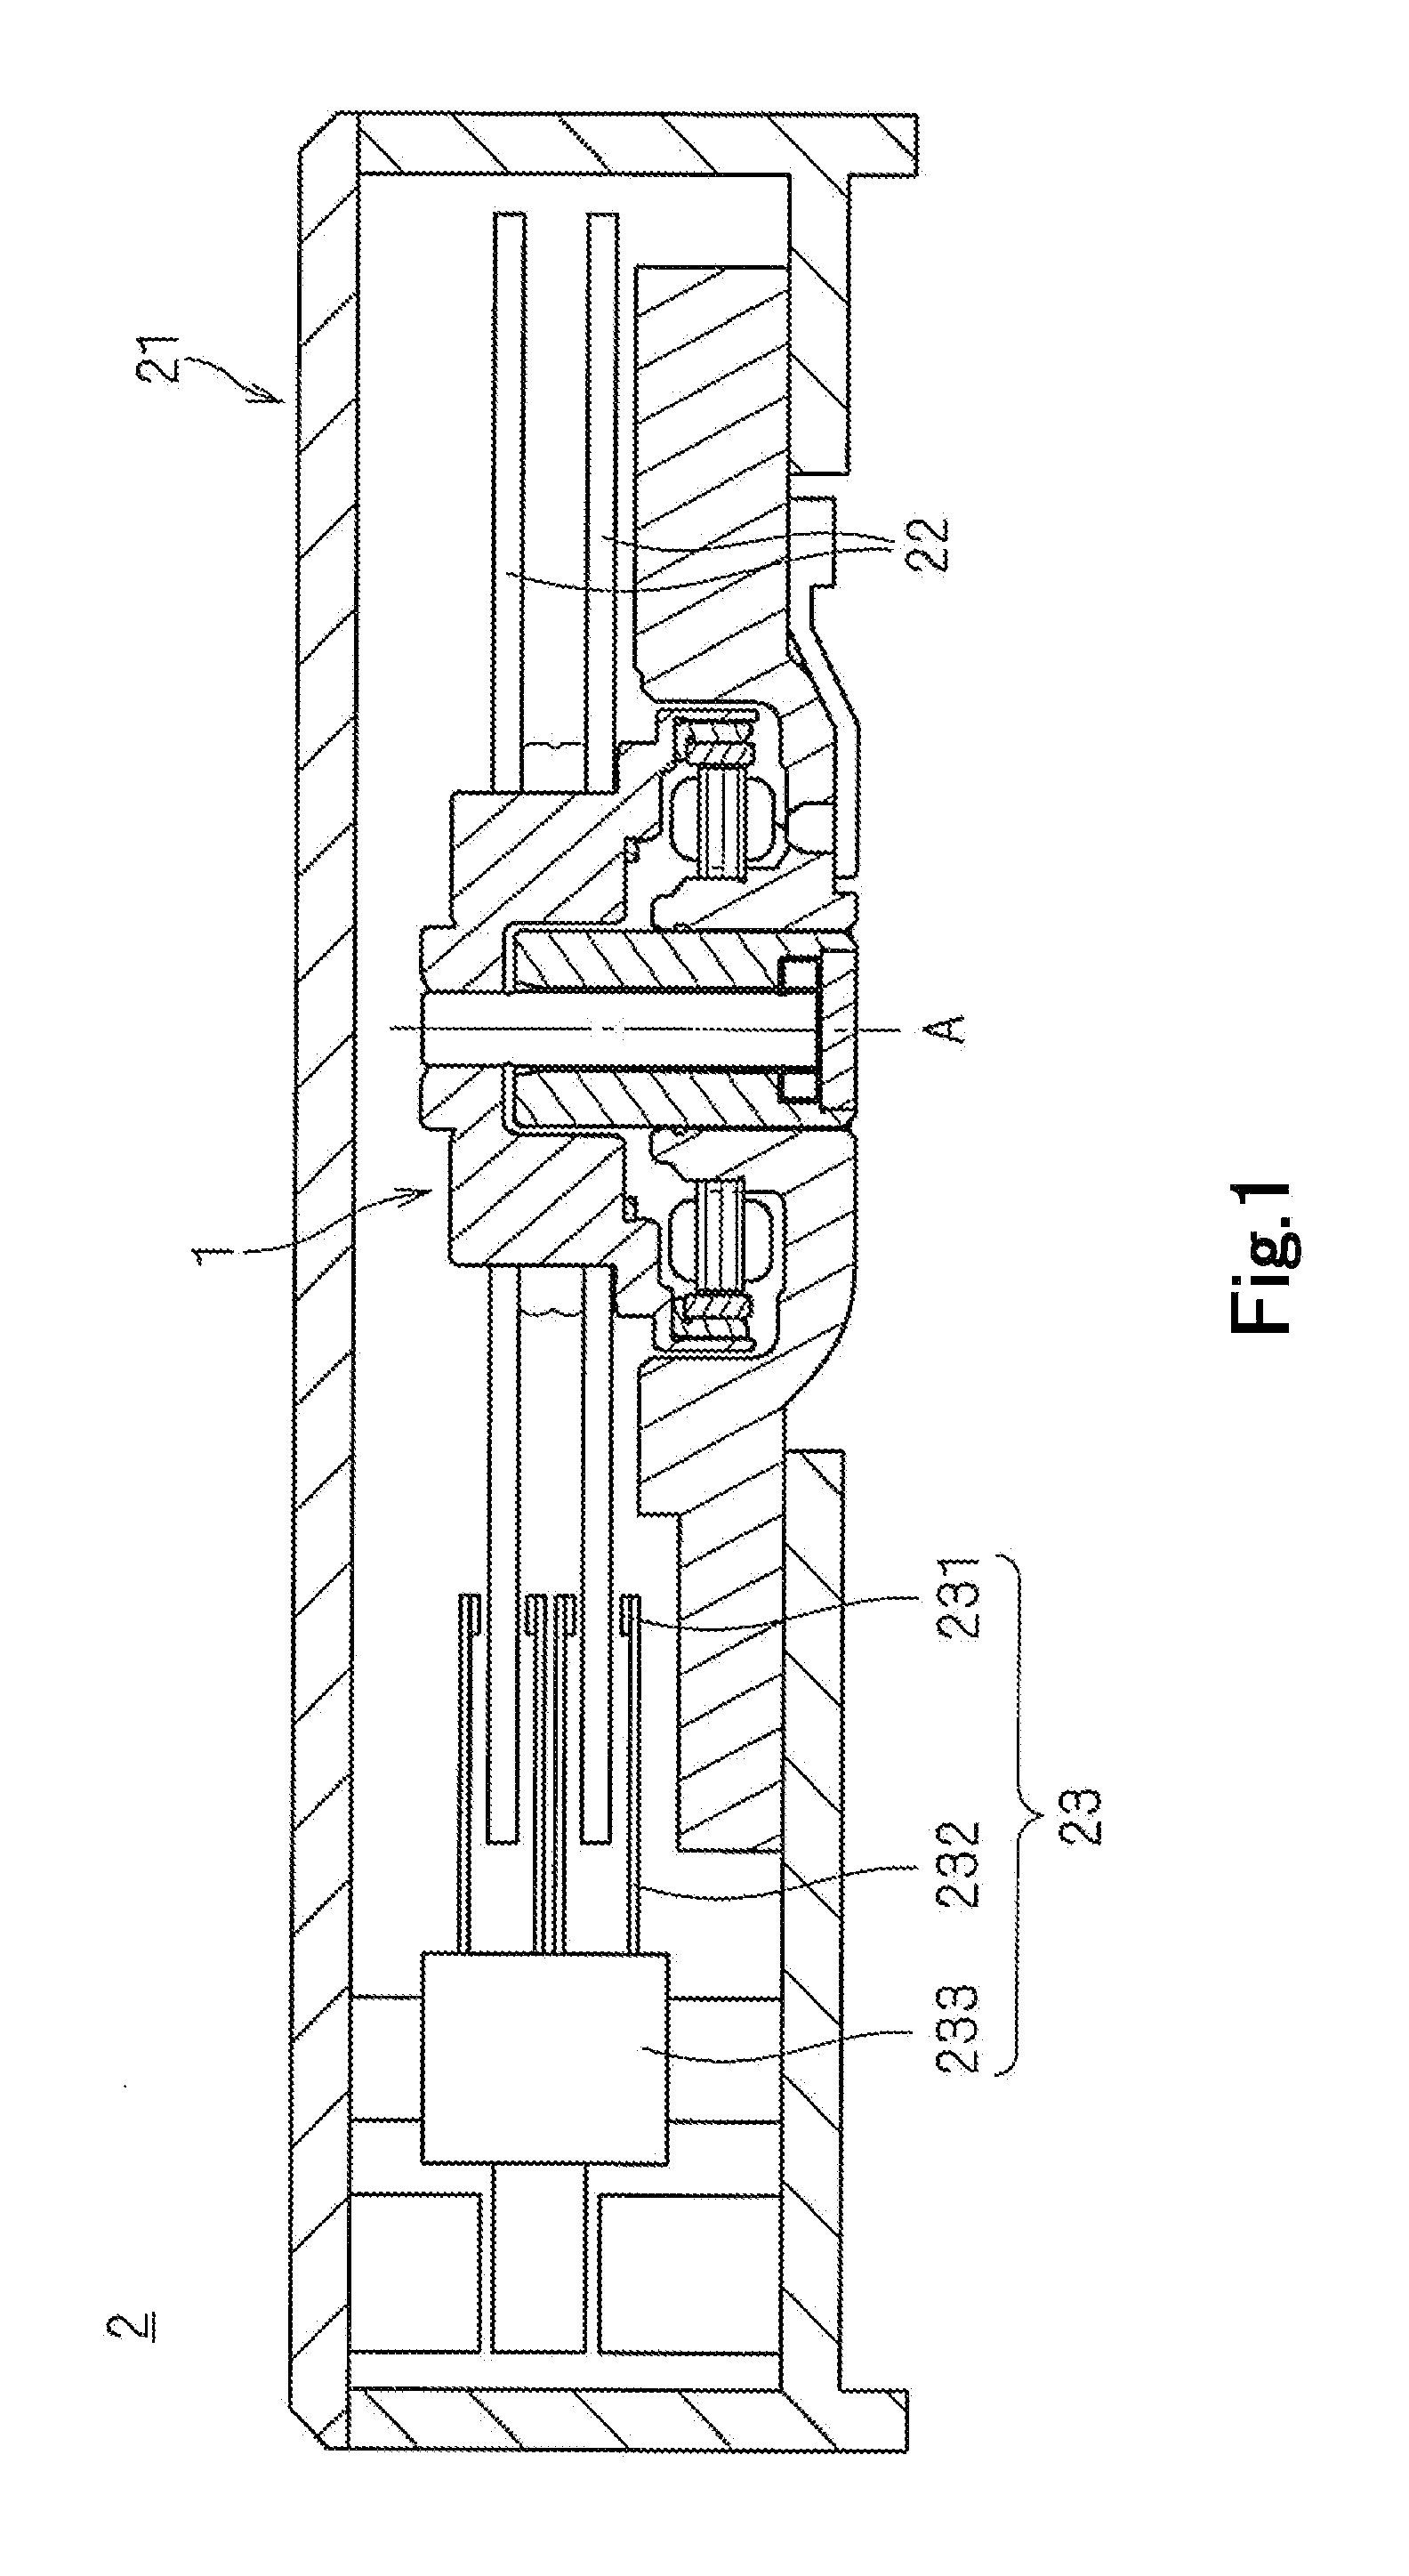 Spindle motor, disk drive apparatus using spindle motor, and method of manufacturing spindle motor